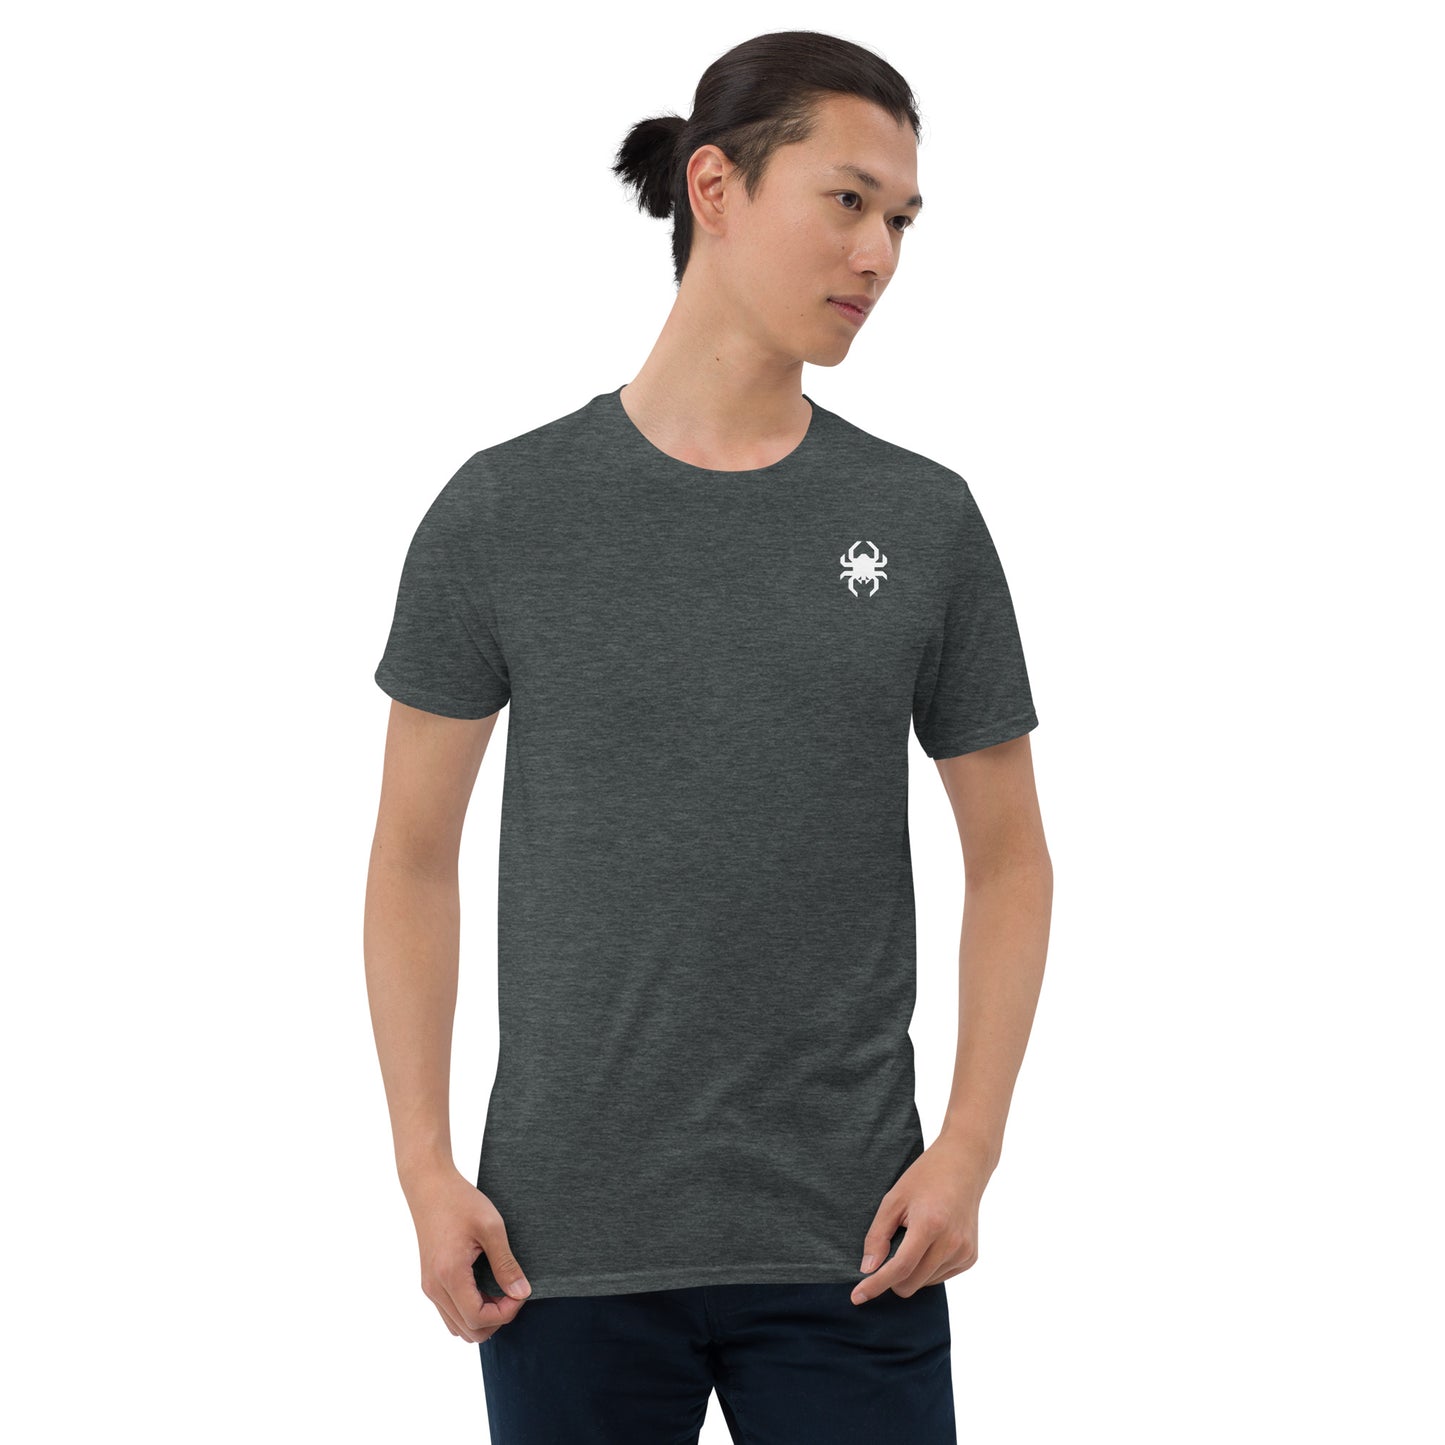 Gym-Spider Essential Workout Tee with Light Logo